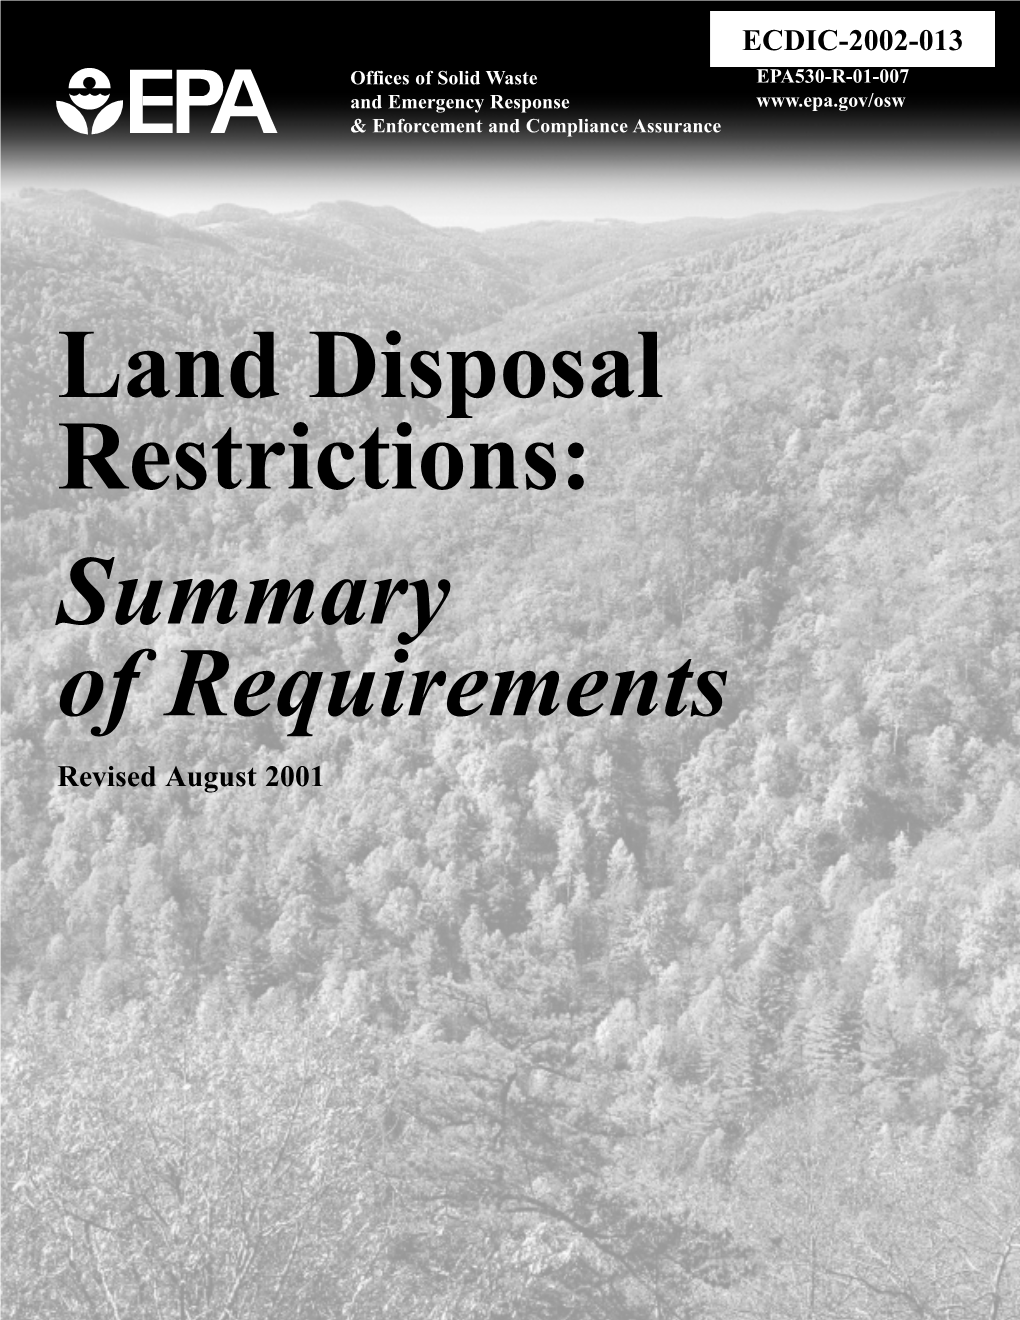 Land Disposal Restrictions: Summary of Requirements Revised August 2001 NOTICE